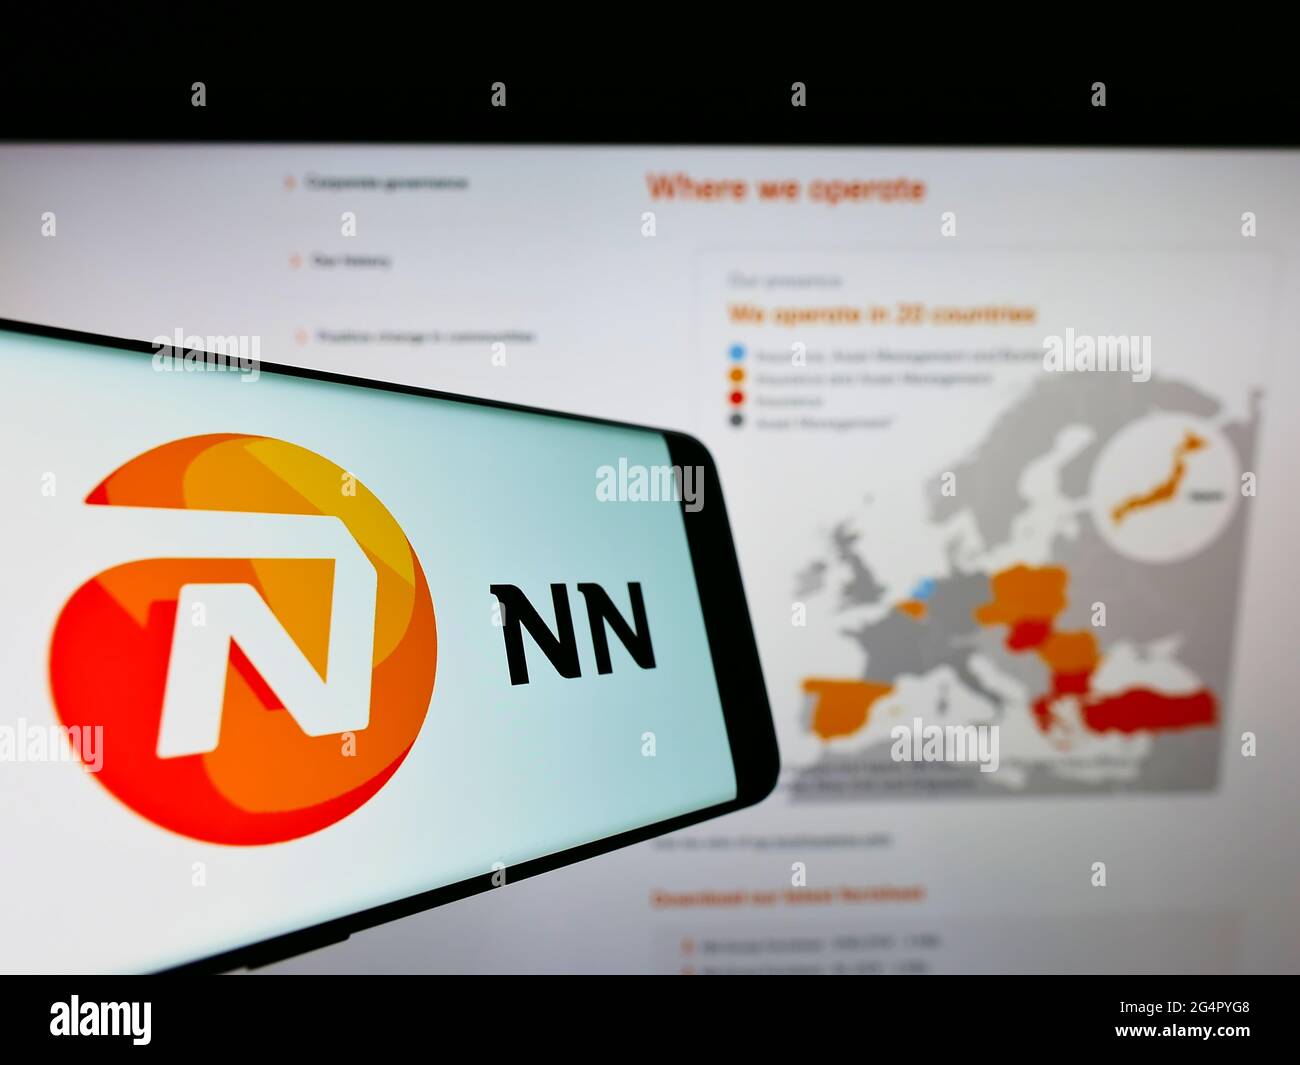 Cellphone with logo of Dutch insurance company NN Group N.V. on screen in front of business website. Focus on center-right of phone display. Stock Photo